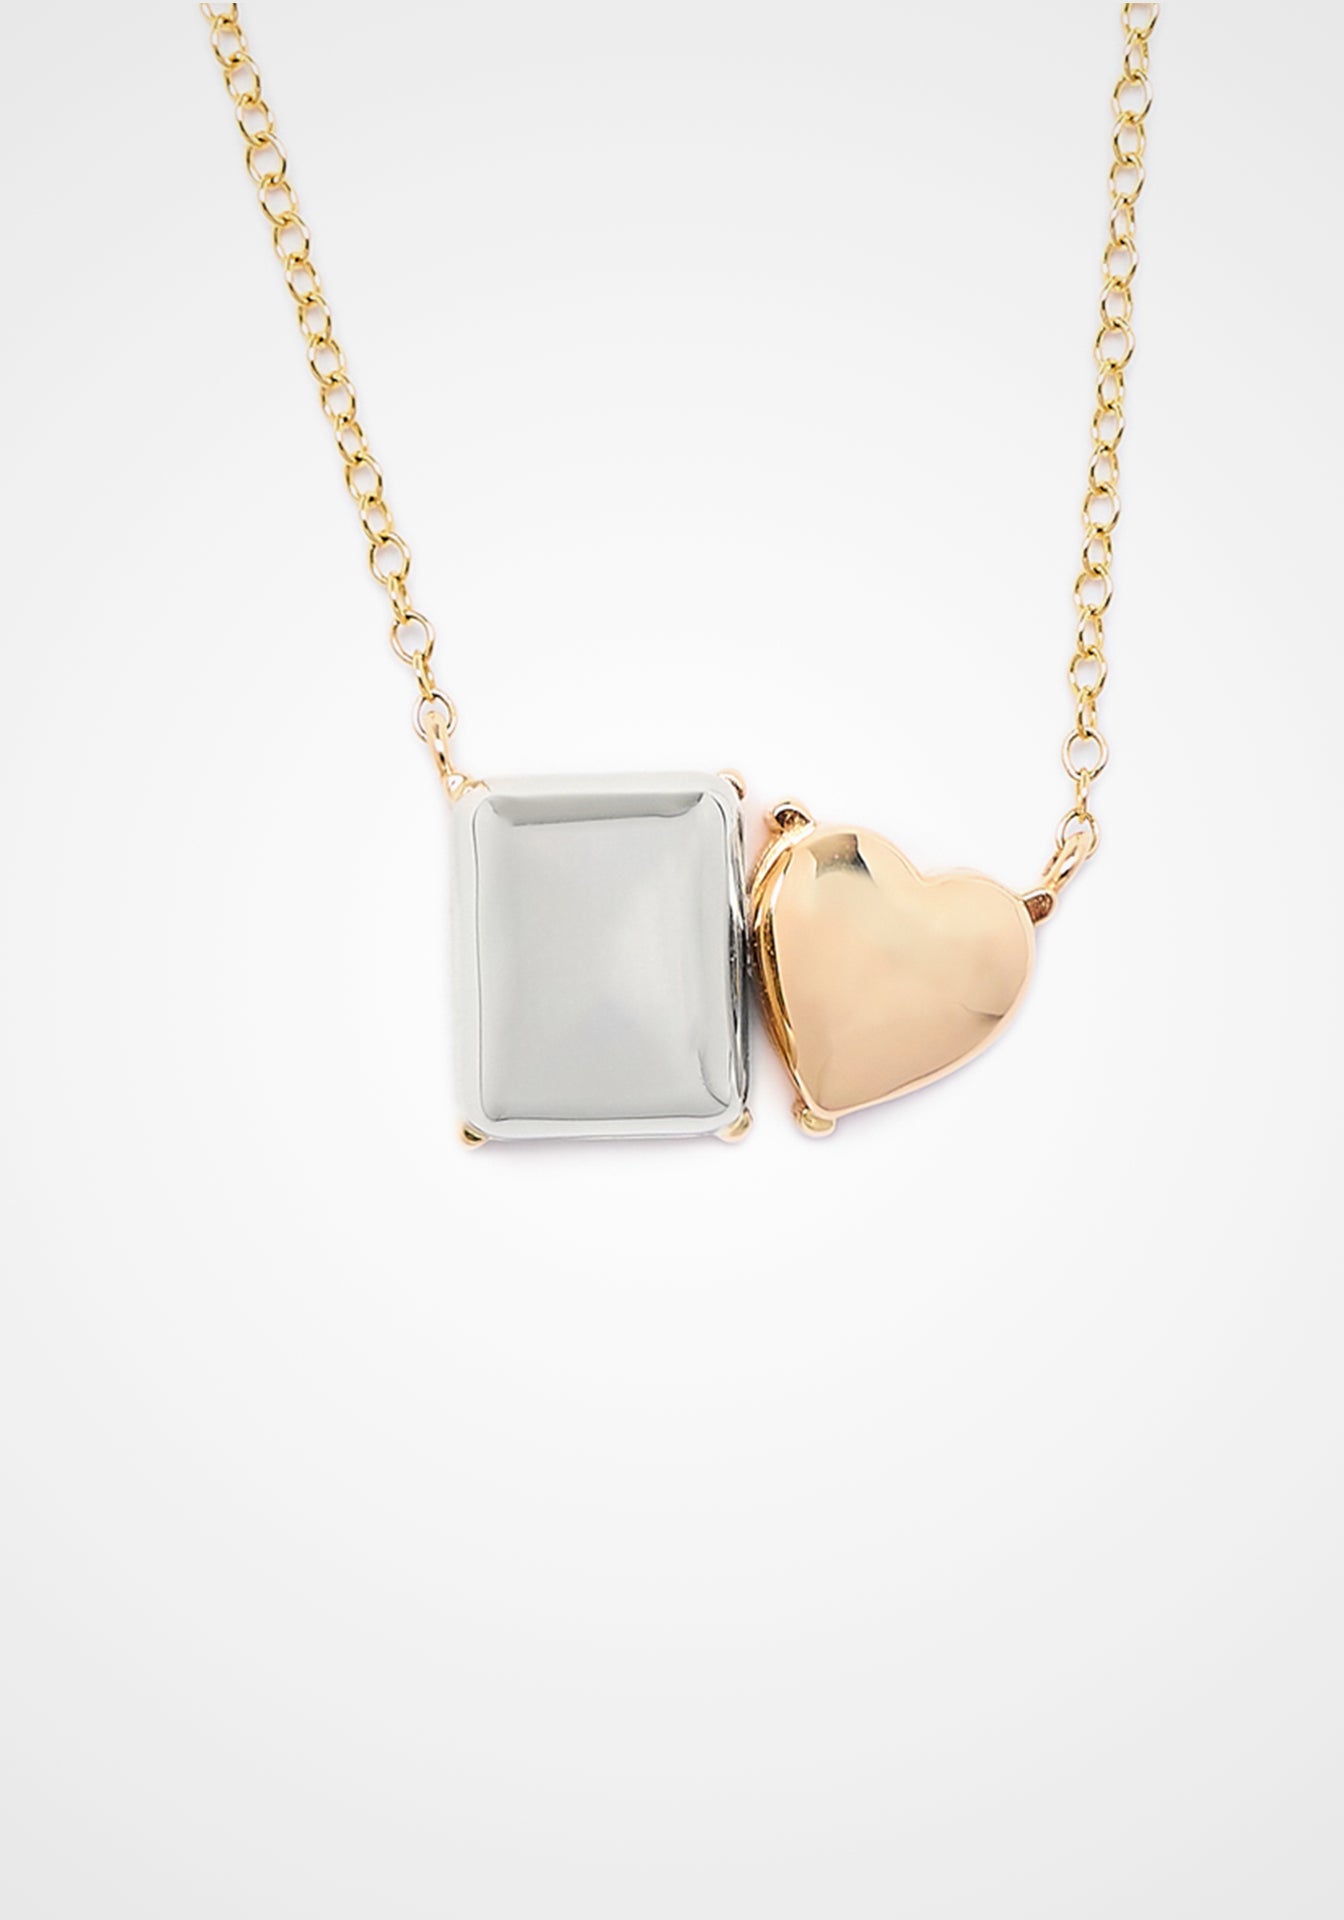 Stoned Toi Et Moi, 14K Yellow Gold Necklace